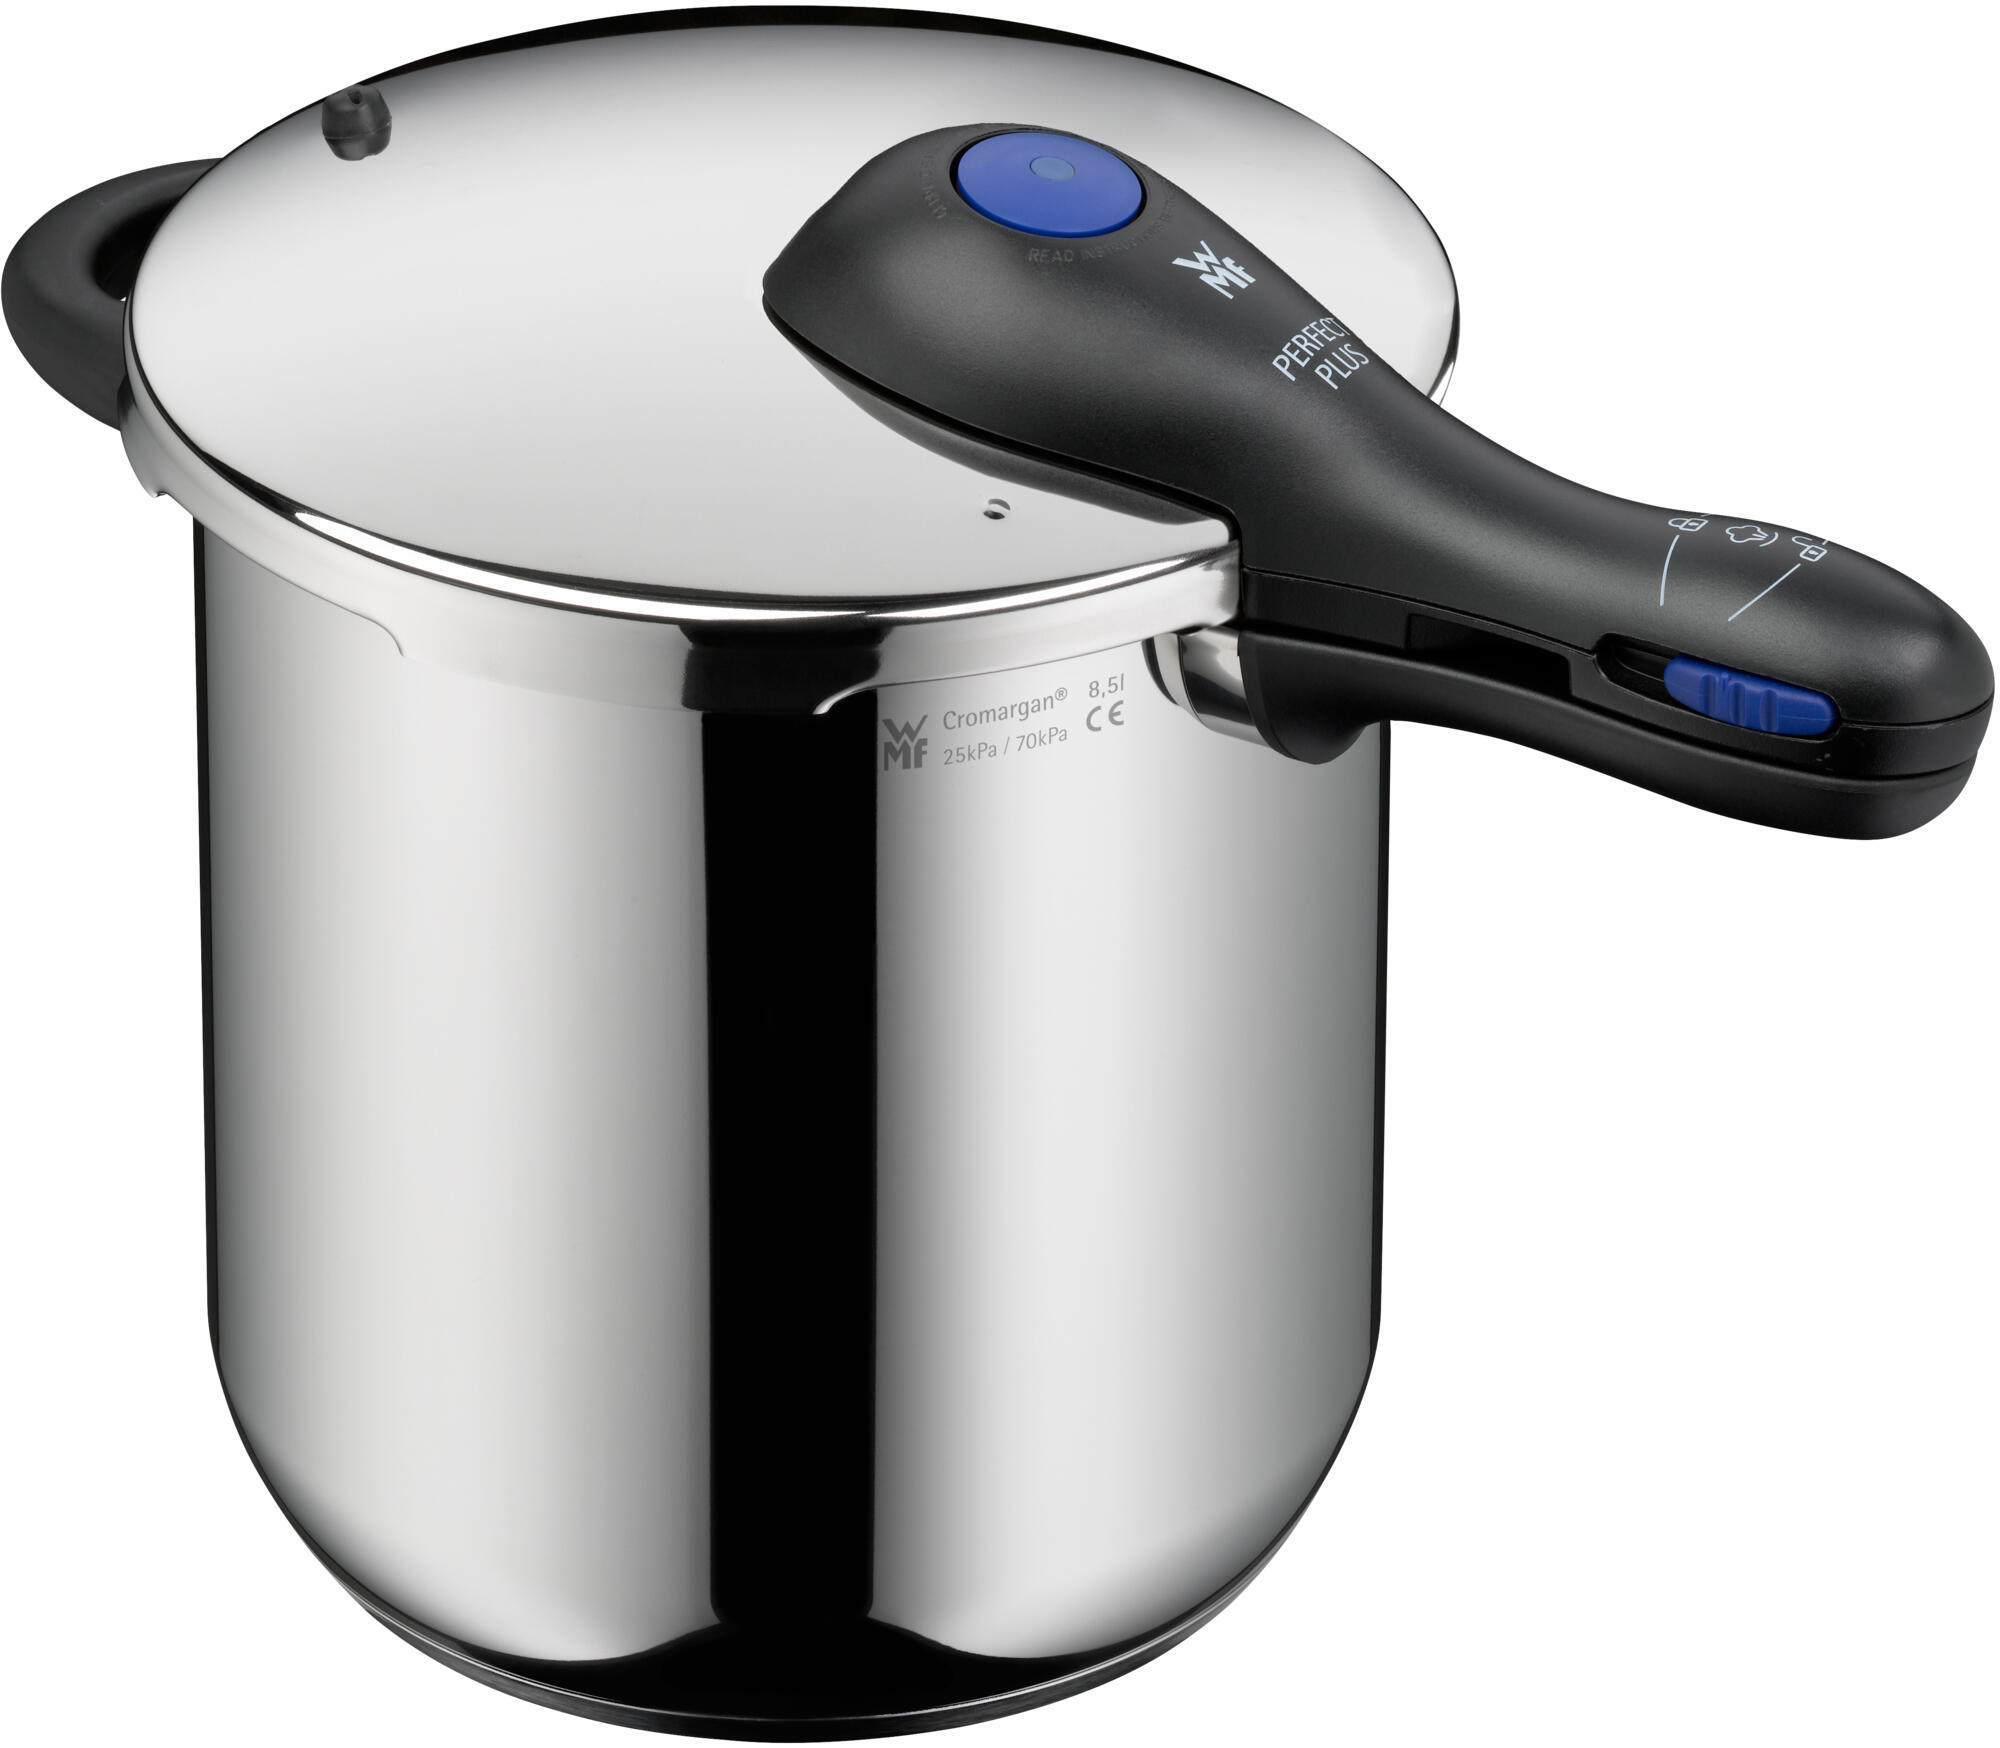 How to configure a WMF Perfect Pressure Cooker Handle - iFixit Repair Guide